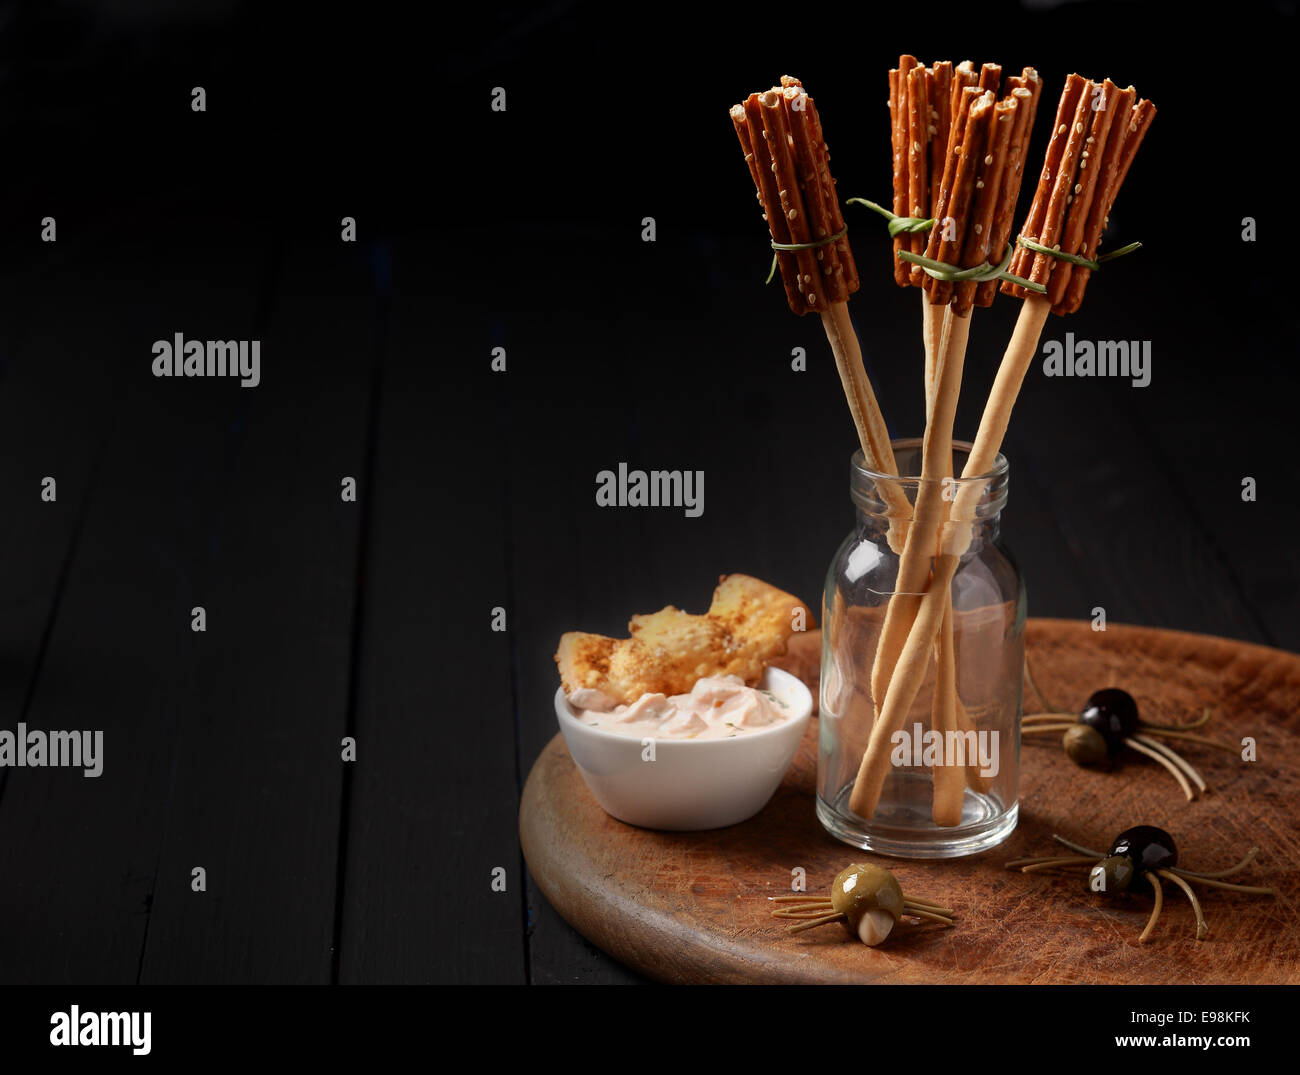 Witches broomsticks at a Halloween party made from bread sticks and pretzels standing in a glass jar on a table decorated with creepy spiders made from olives and spaghetti Stock Photo